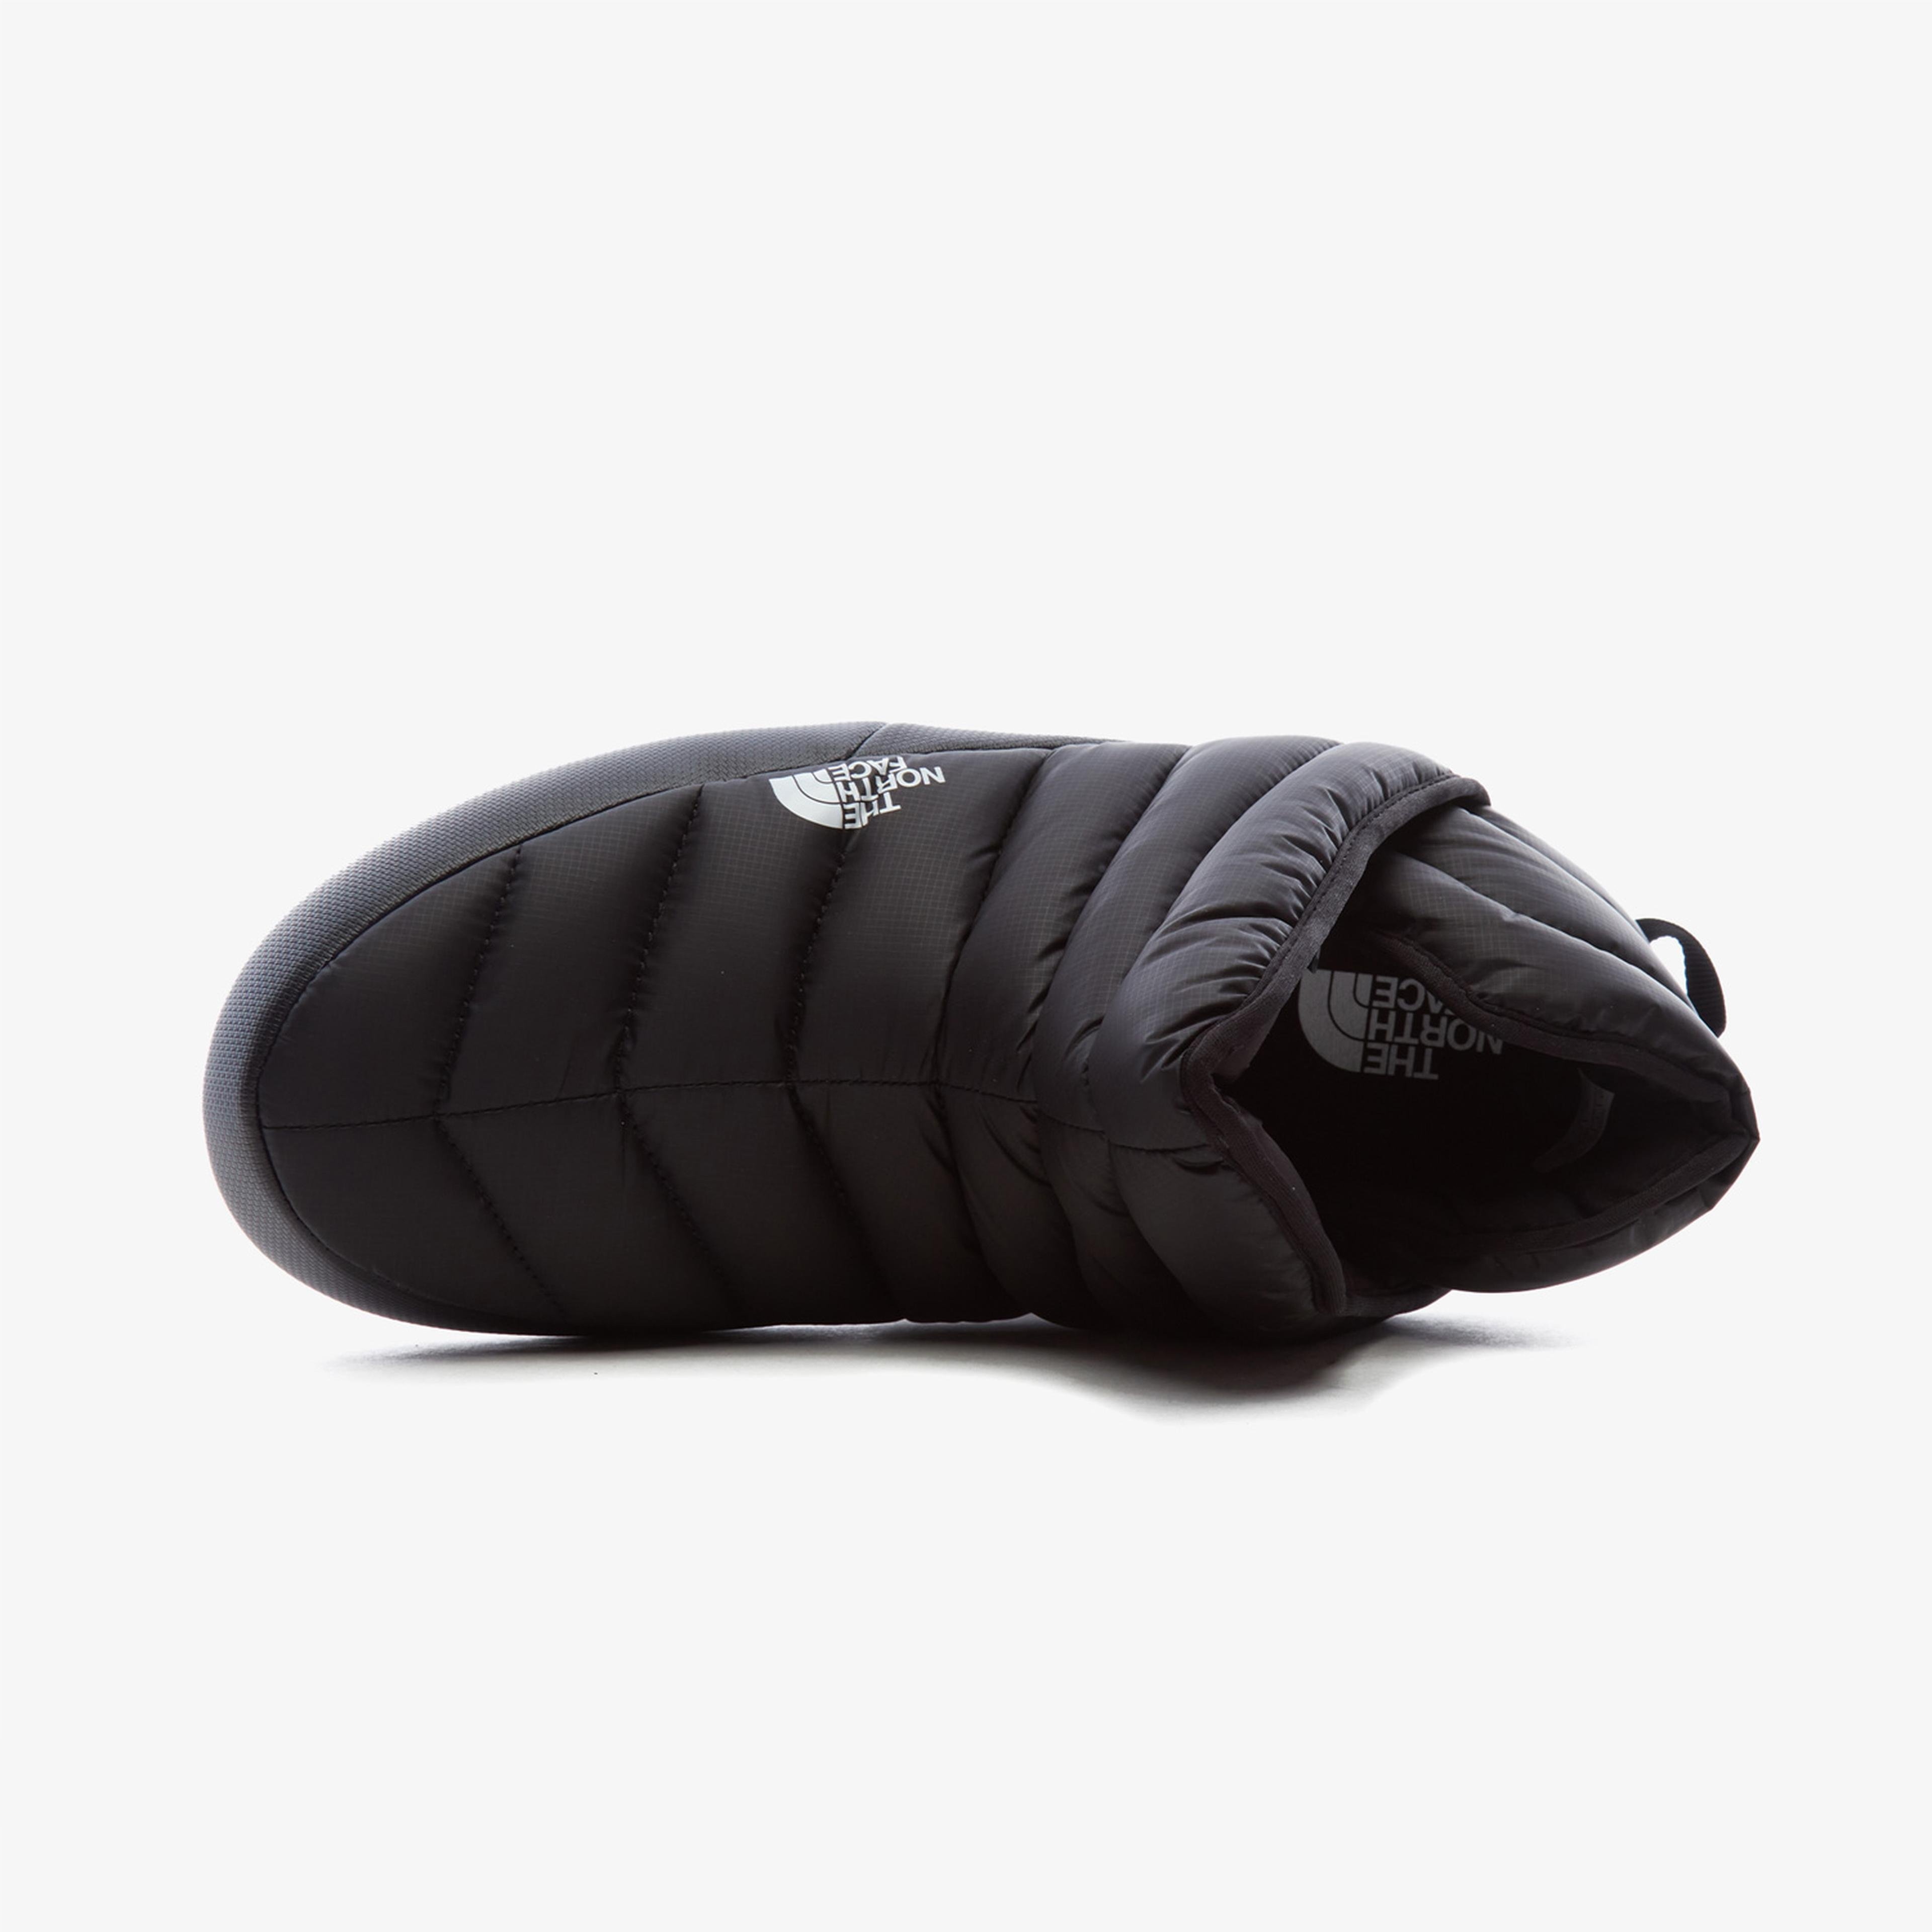 The North Face Thermoball Traction Erkek Siyah Bot